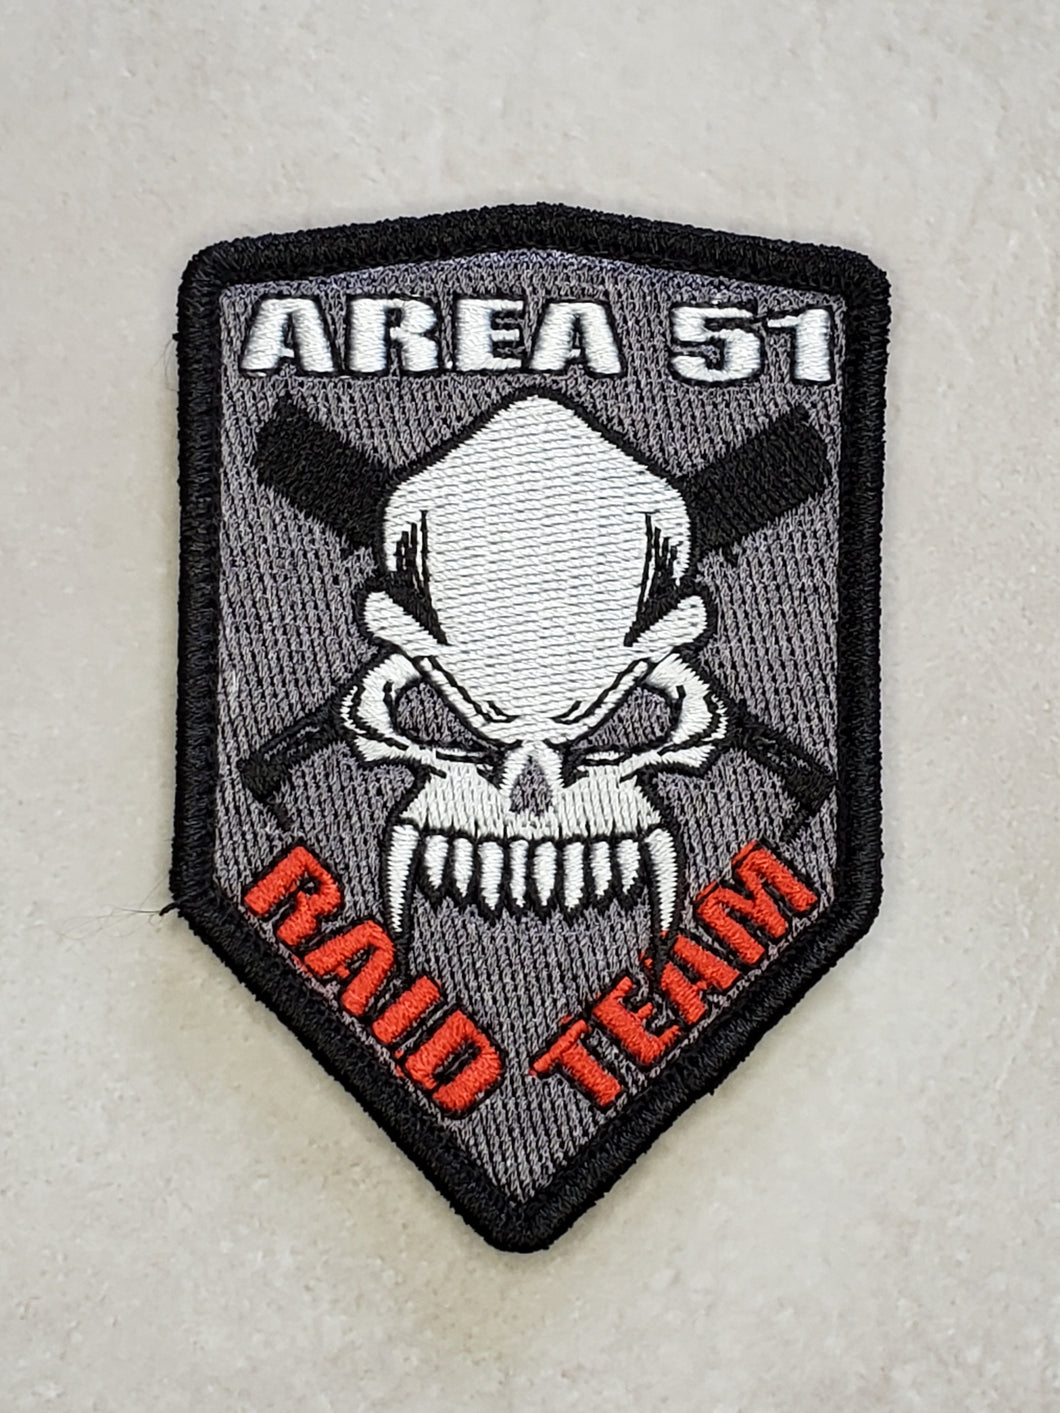 Area 51 Raid Team Embroidered Morale Patch